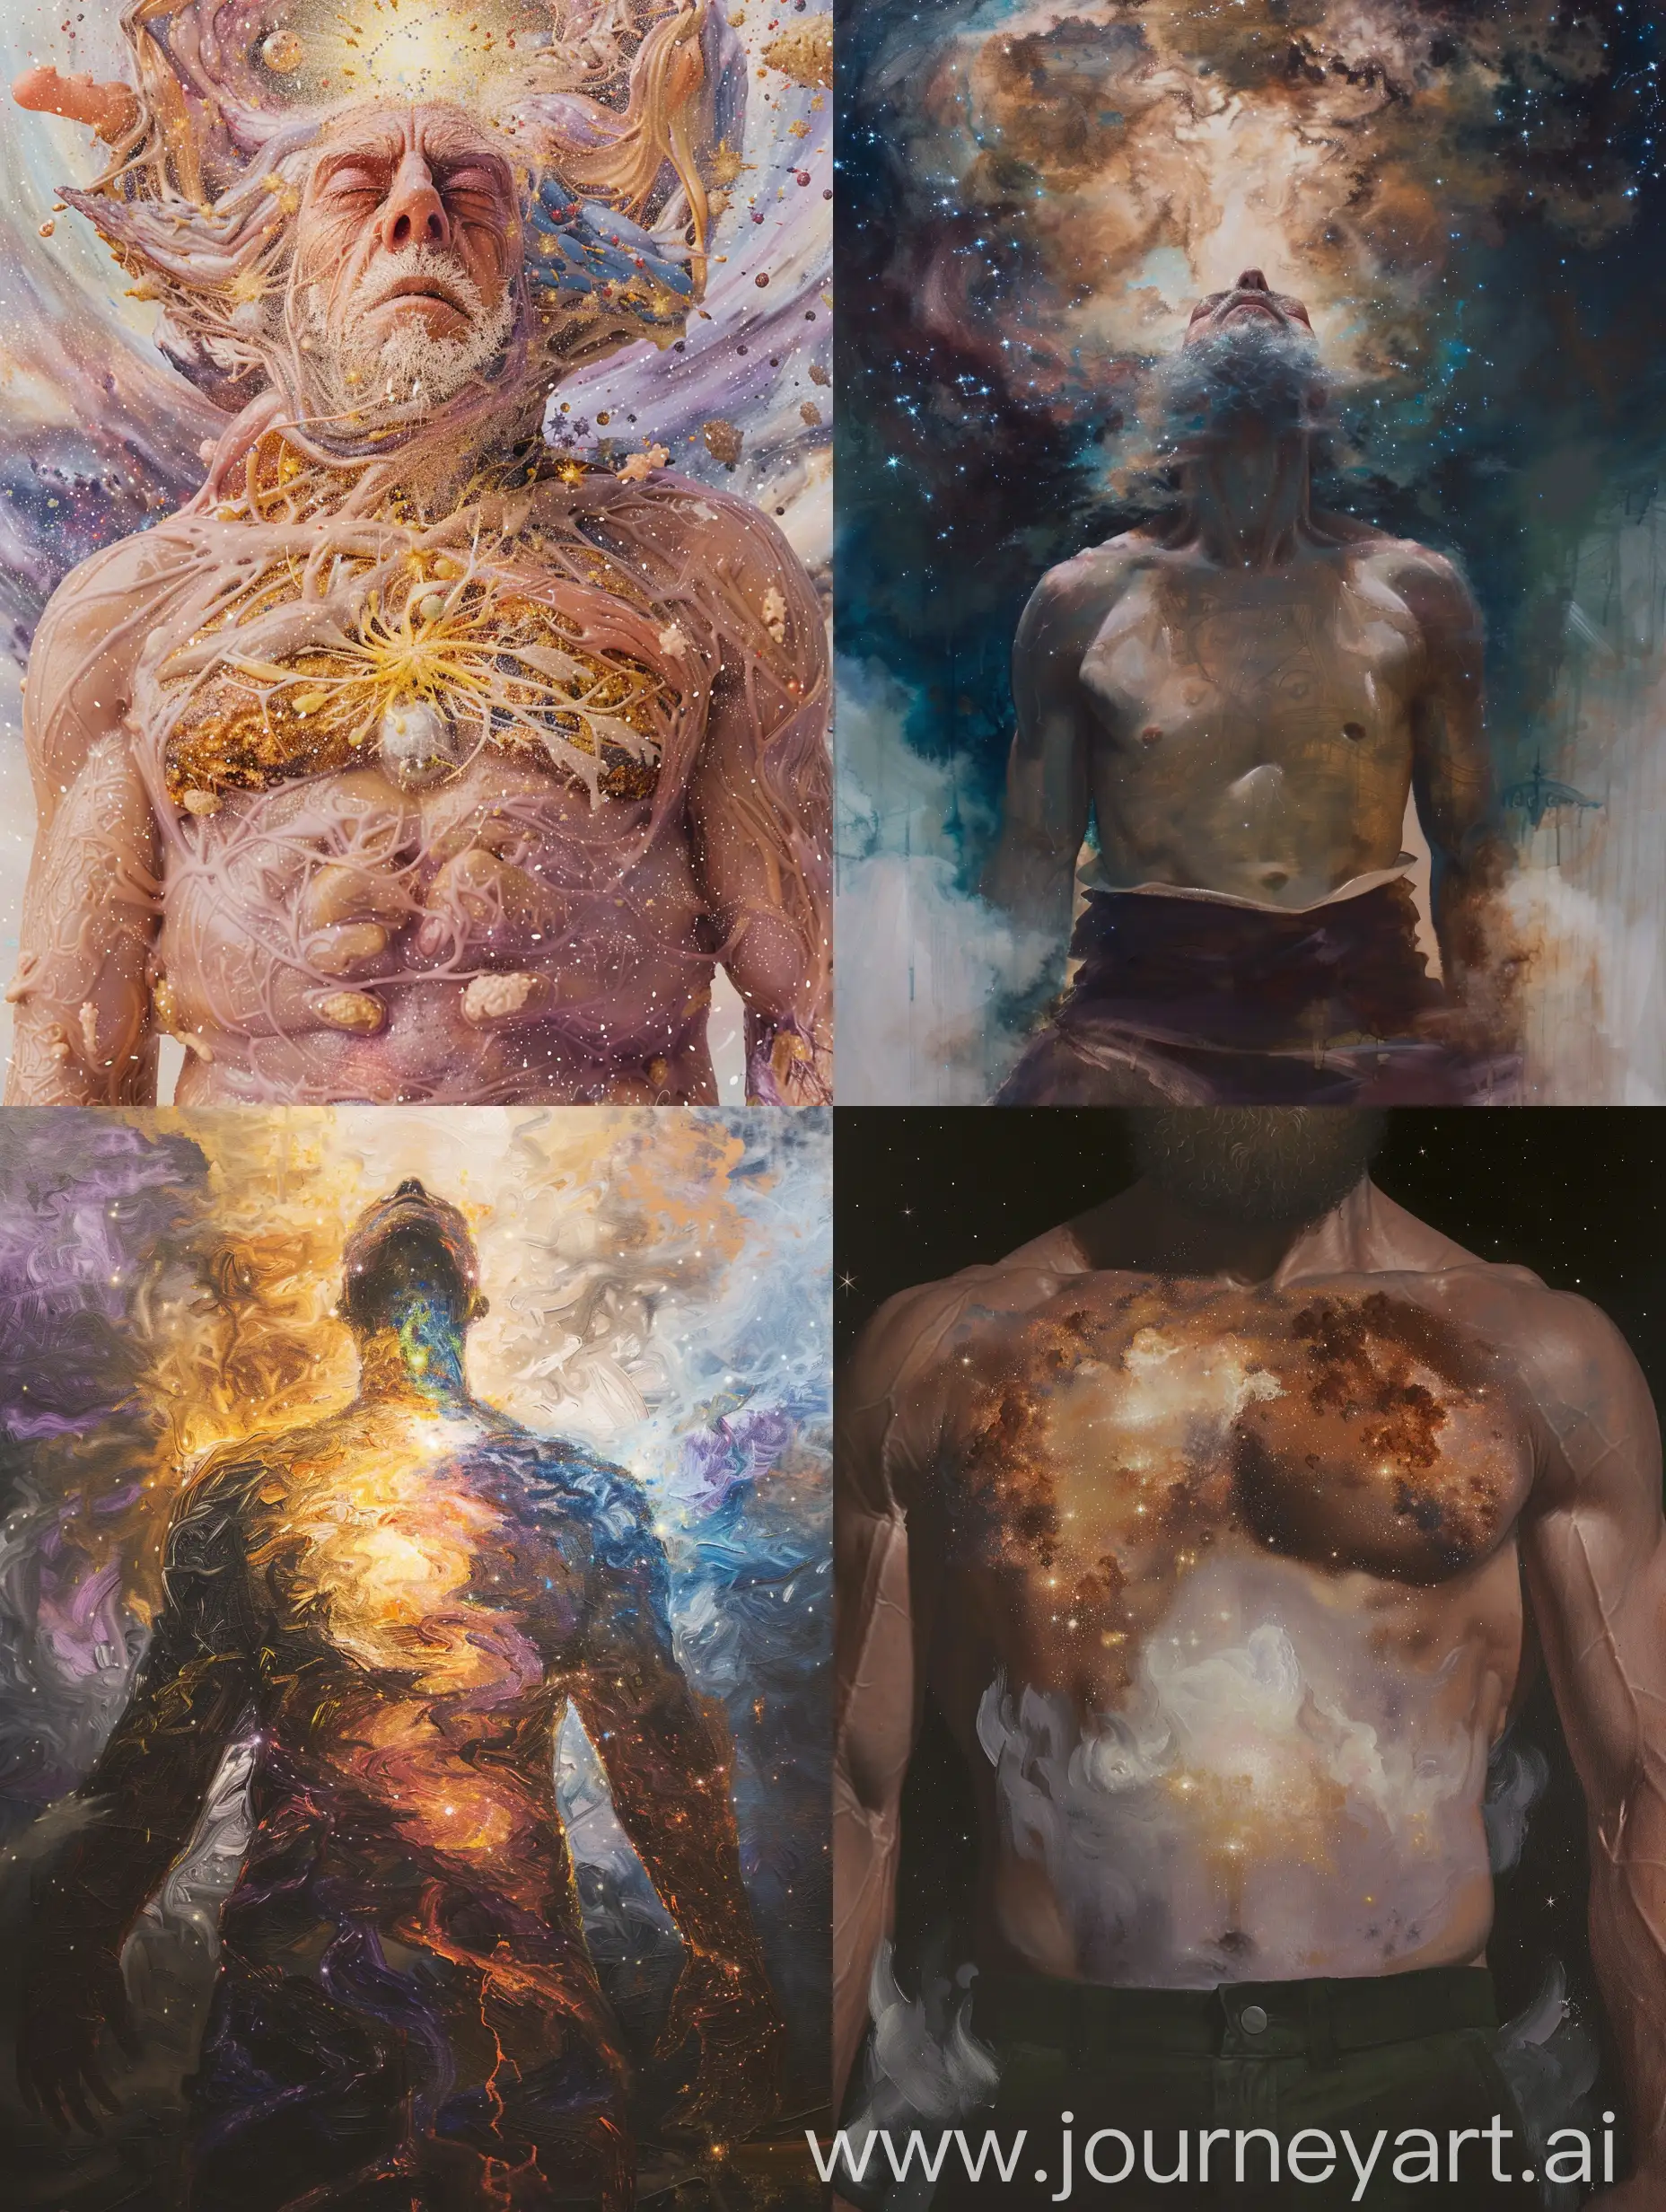 Details from my imagination for the systems of journey: altar art paints, #fantasyart #characterart #midjourney #aigeneratedart #alart #alartcommunity #alartists. 

Details, subject: #oil #painting on #canvas #art, #contrast #noai. Photorealism. Waist up view, the first primordial, the first god, the very sky and stars itself manifested in a lesser divine form. He has the appearance of his realm his own body. 

Finishing details: #polish #master #artist #surreal #special, #artificialintelligence #aiart #aiartwork #aiartist #aiartcommunity #midjourney #midjourneyart. 